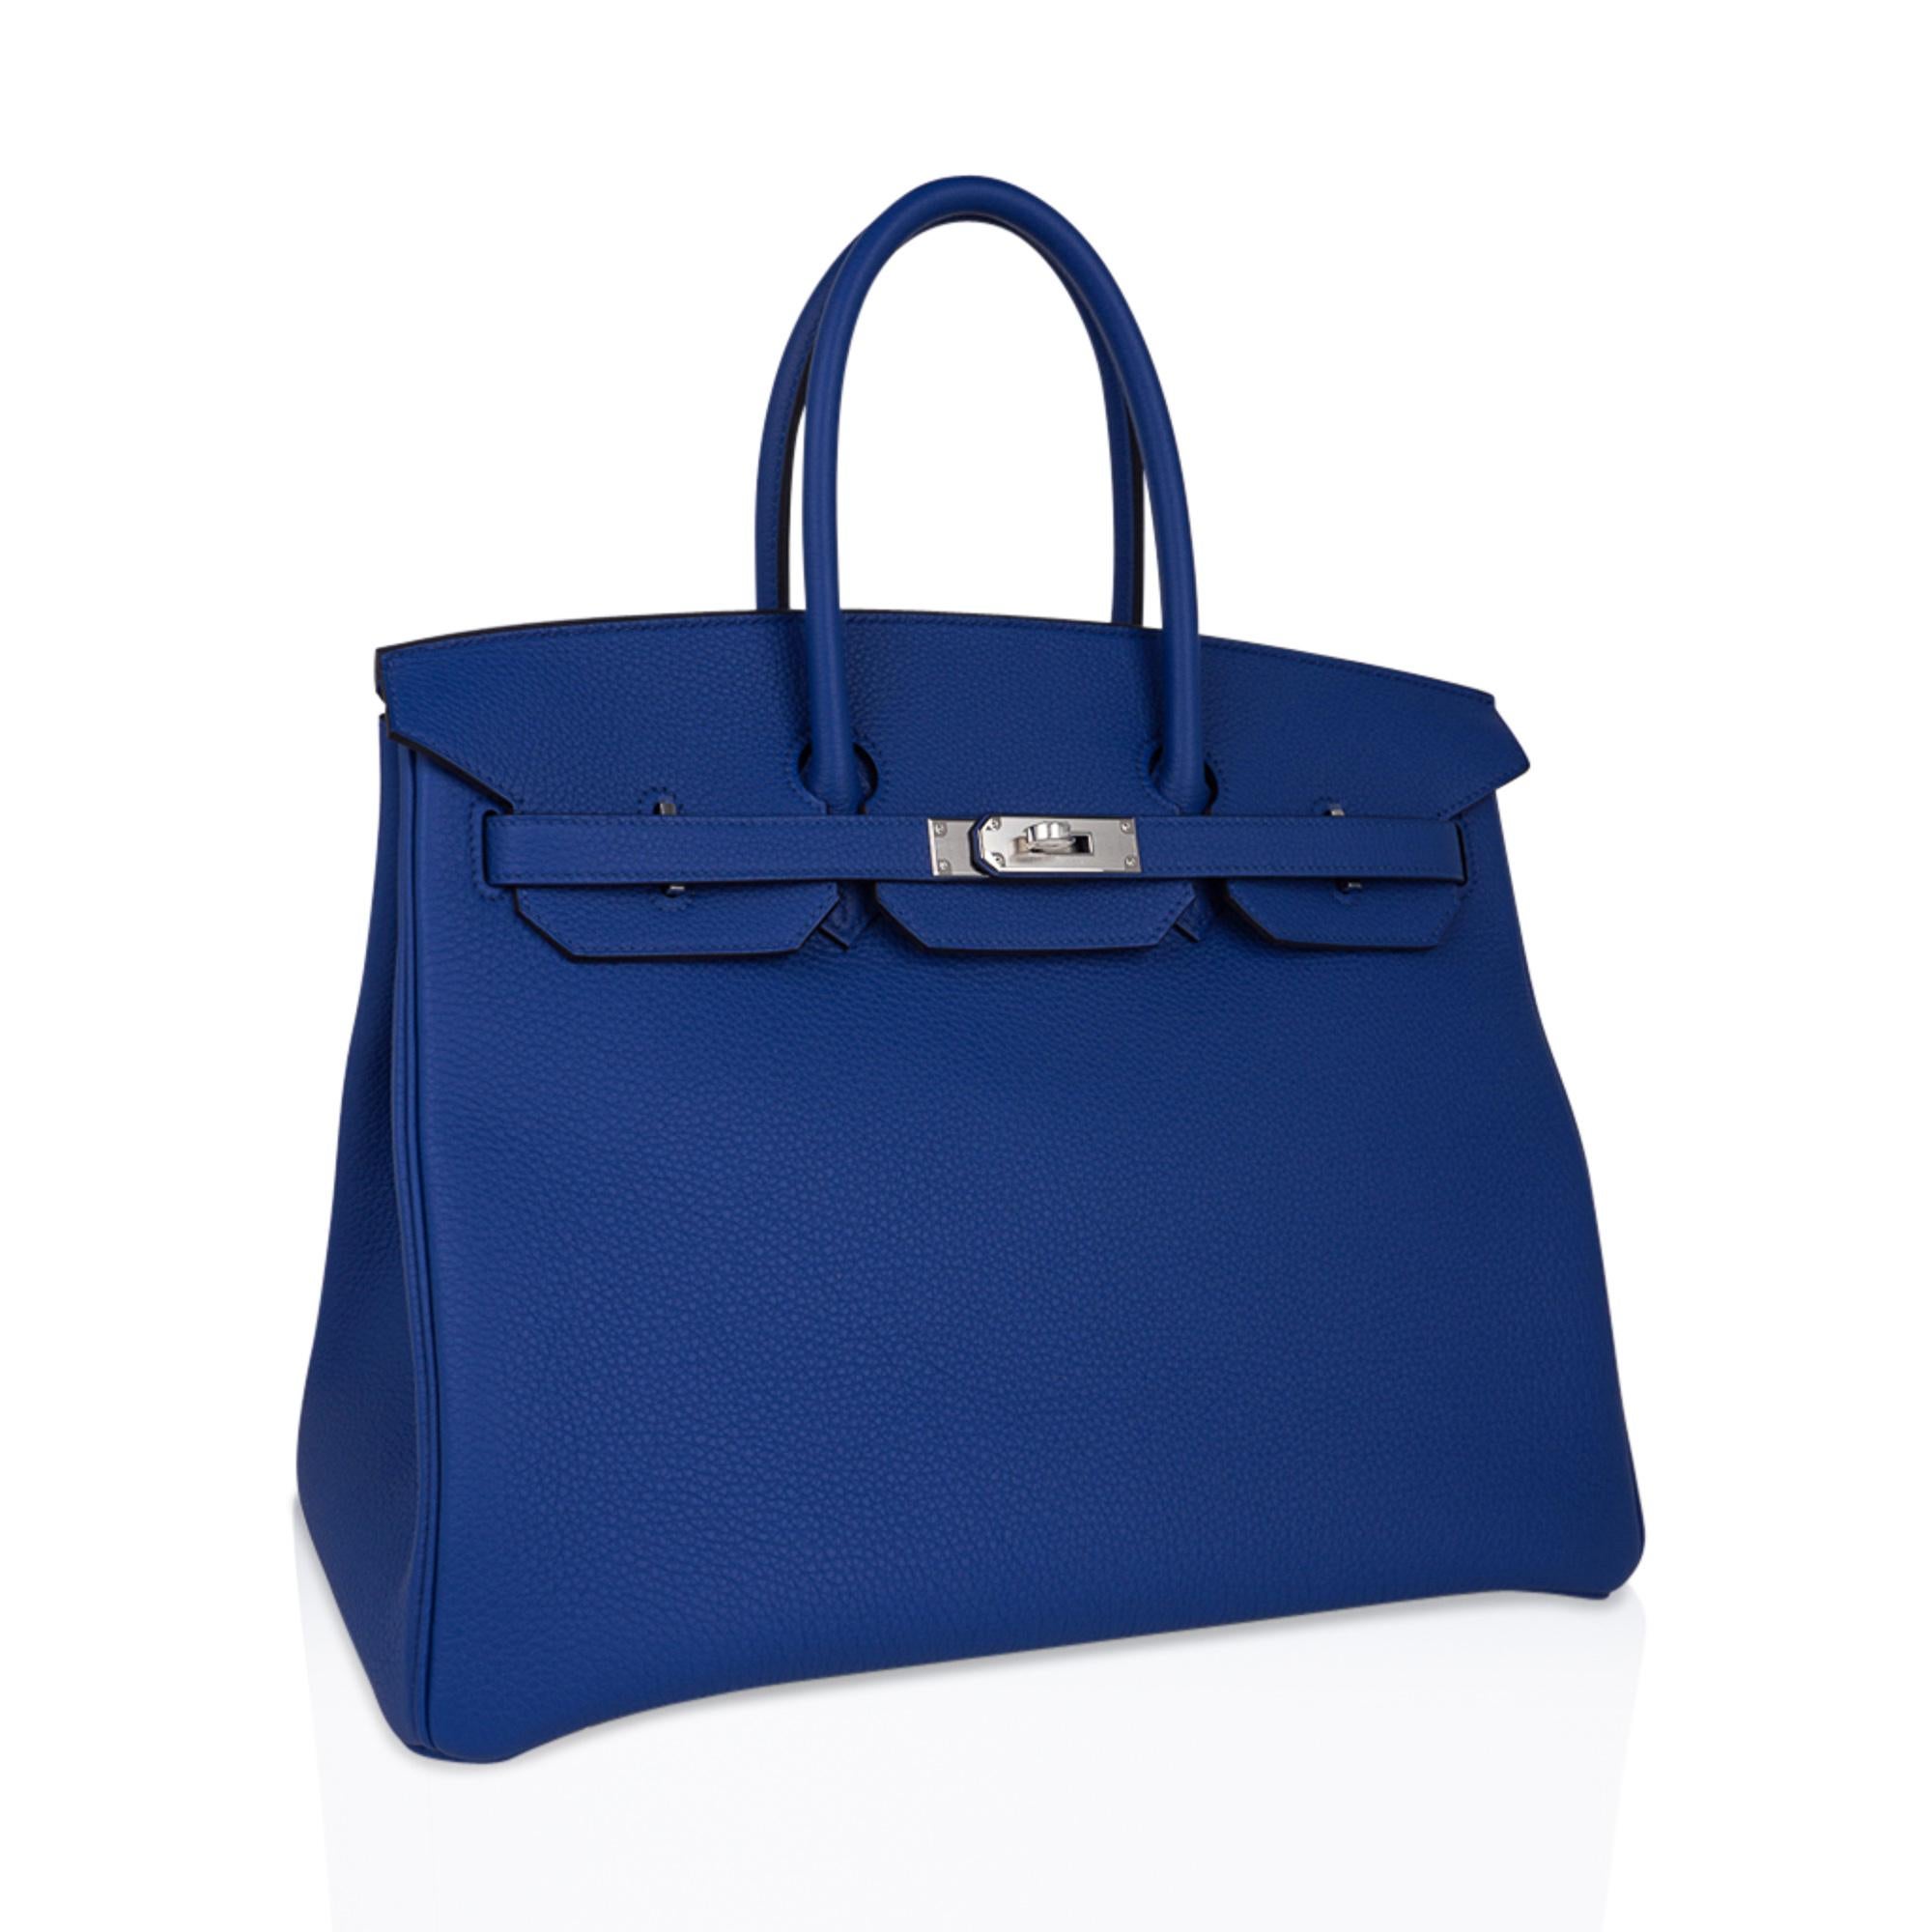 Mightychic offers an Hermes Birkin 35 bag featured in vibrant Bleu de  France.
This blue Hermes Birkin bag is breathtaking in its richly saturated colour.
Togo leather is textured and highly scratch resistant.
Fresh with palladium hardware. 
Comes